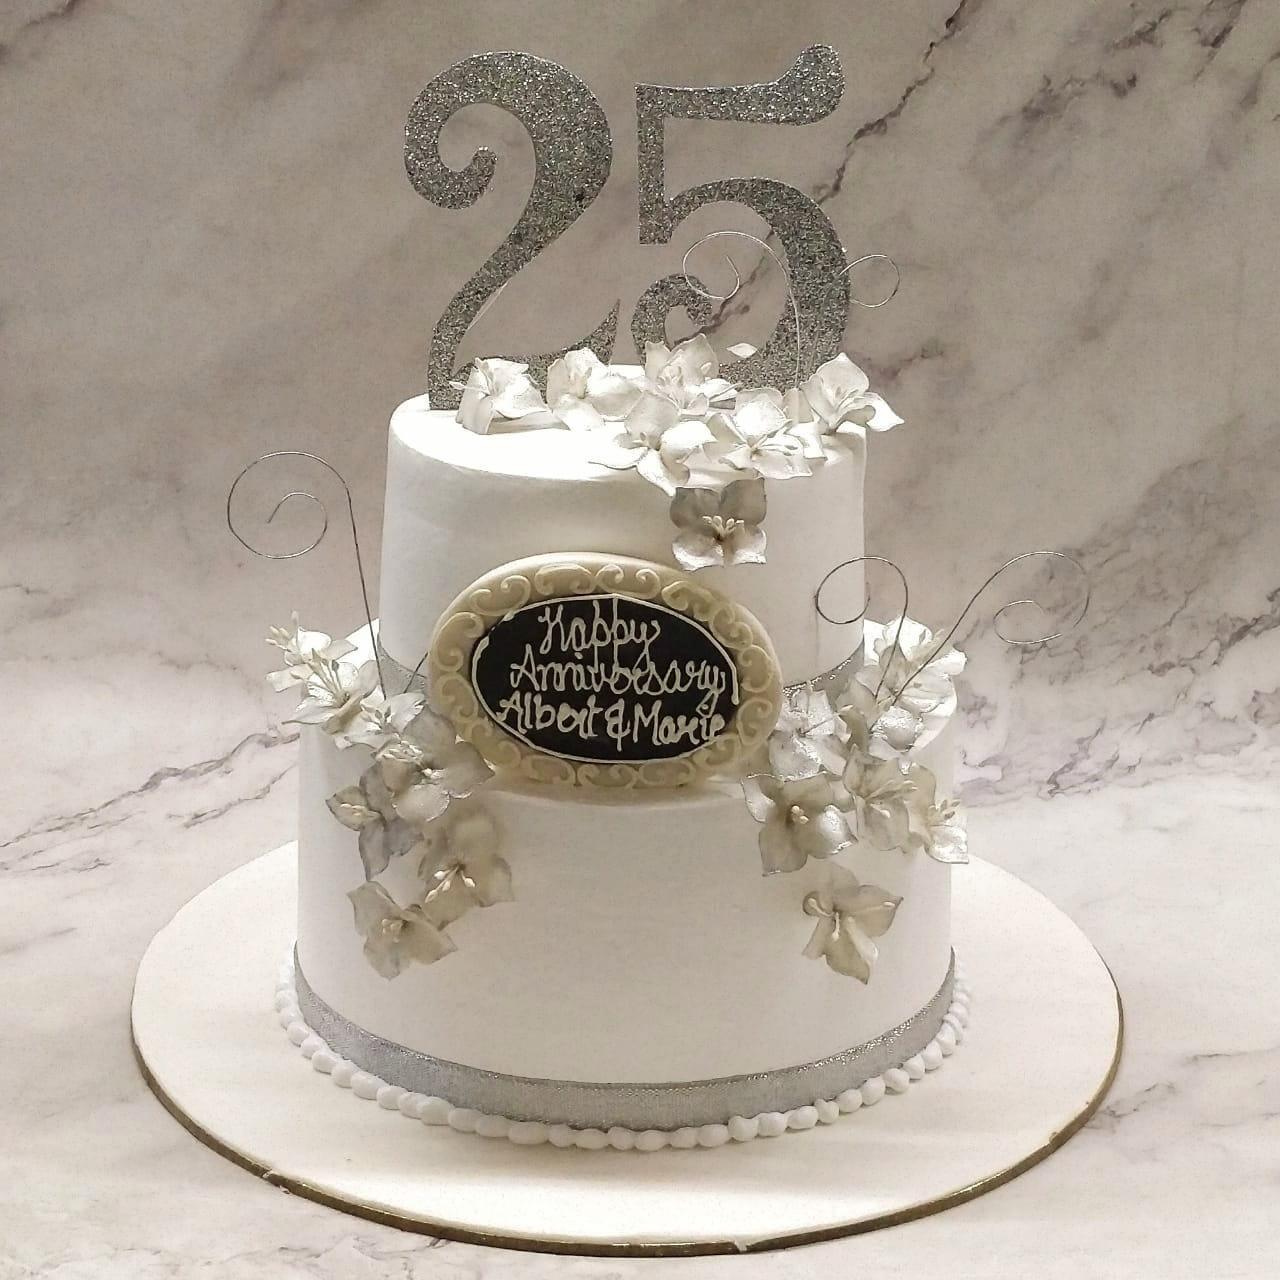 25th Anniversary Cake – Oven time